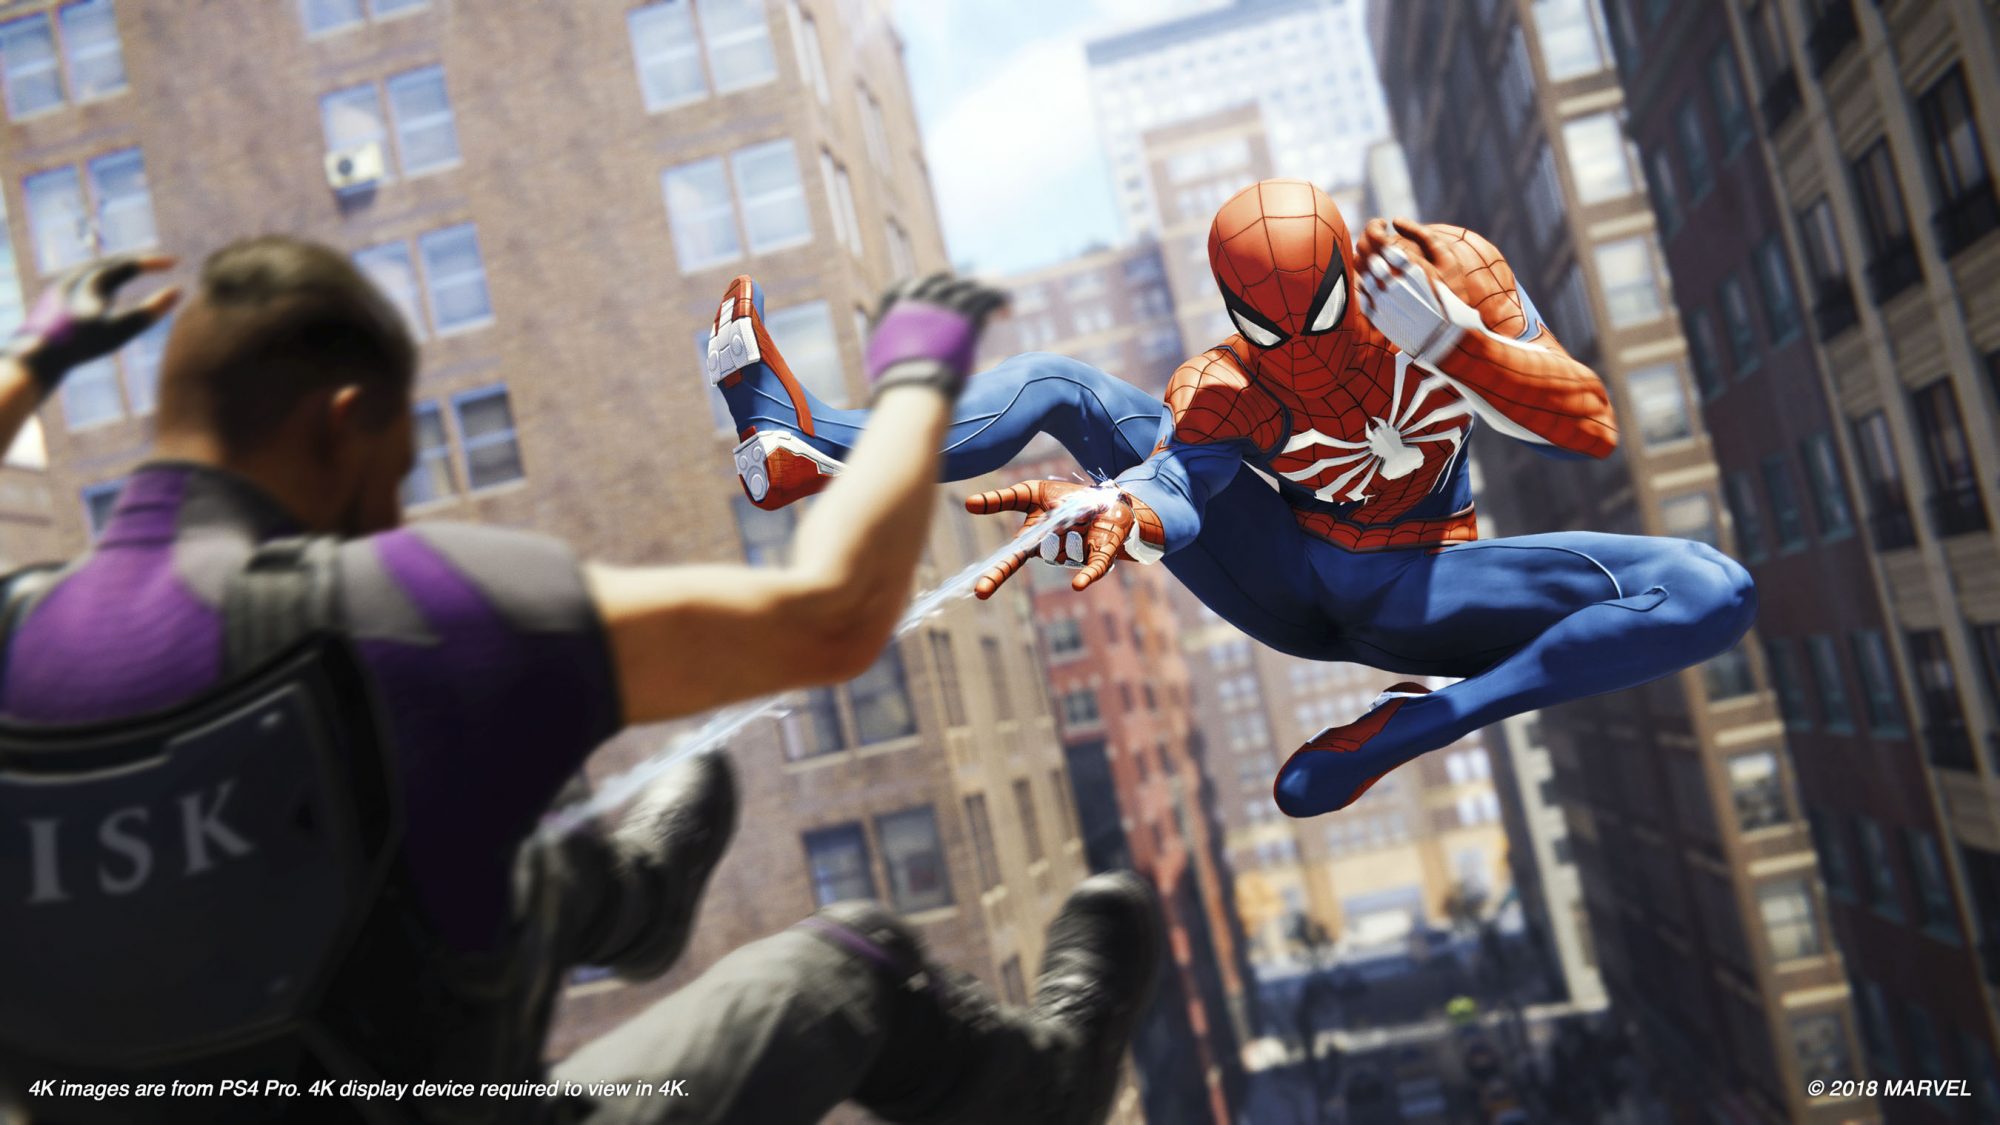 Marvel S Spider Man Is A Friendly Open World Action Game With